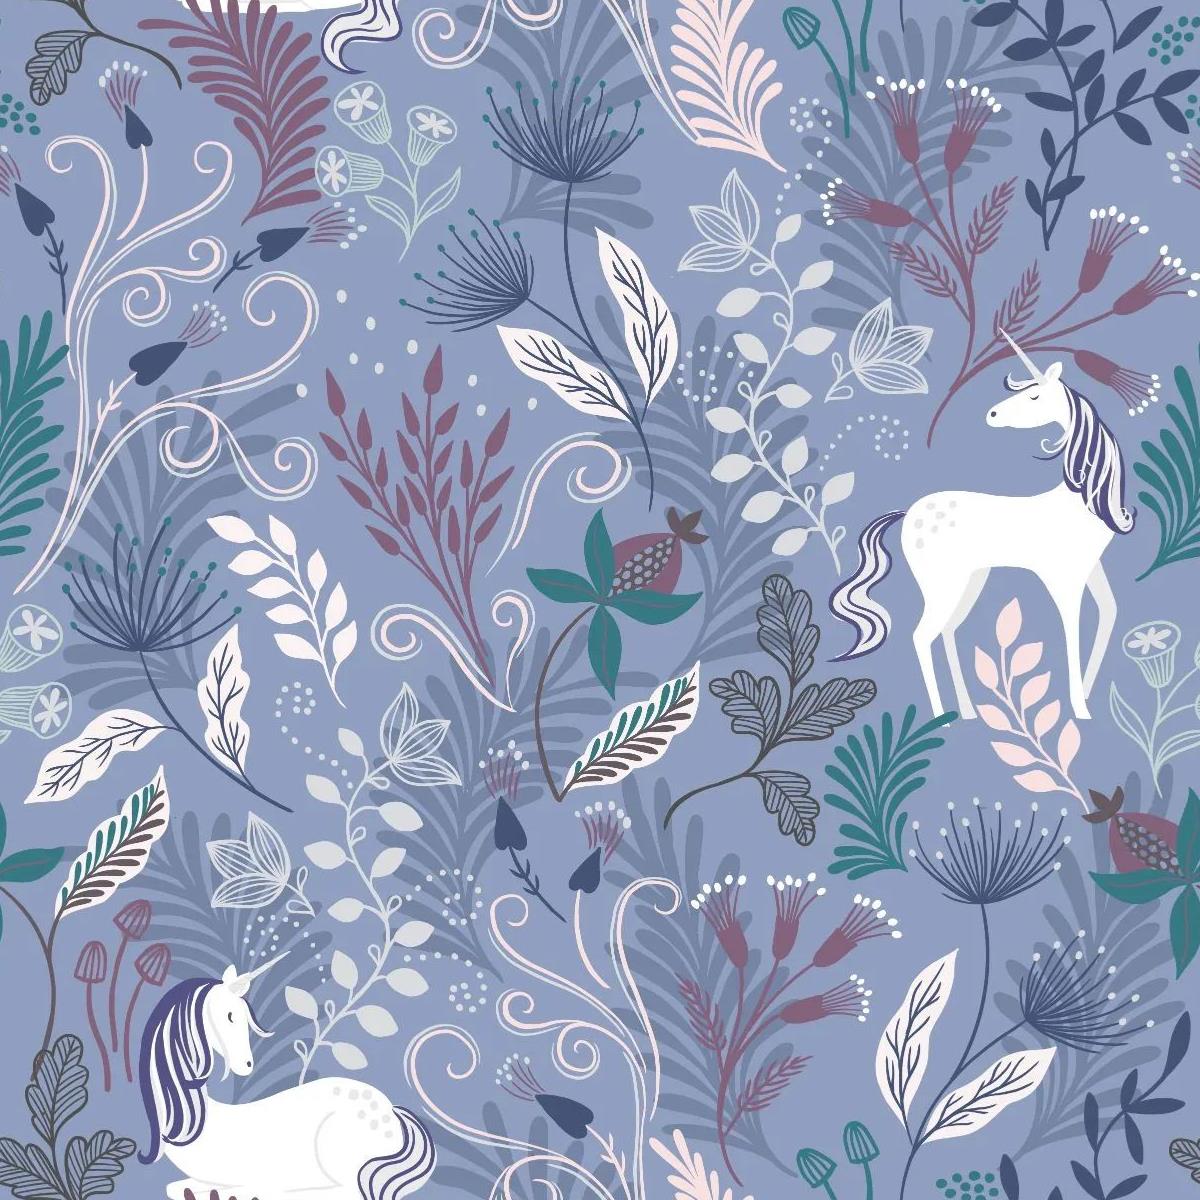 /images/product-images/2020images/FashionFabric/CraftCotton/LINov21/A543.2-Unicorn-on-smokey-blue-with-silver-metallic-01.jpg